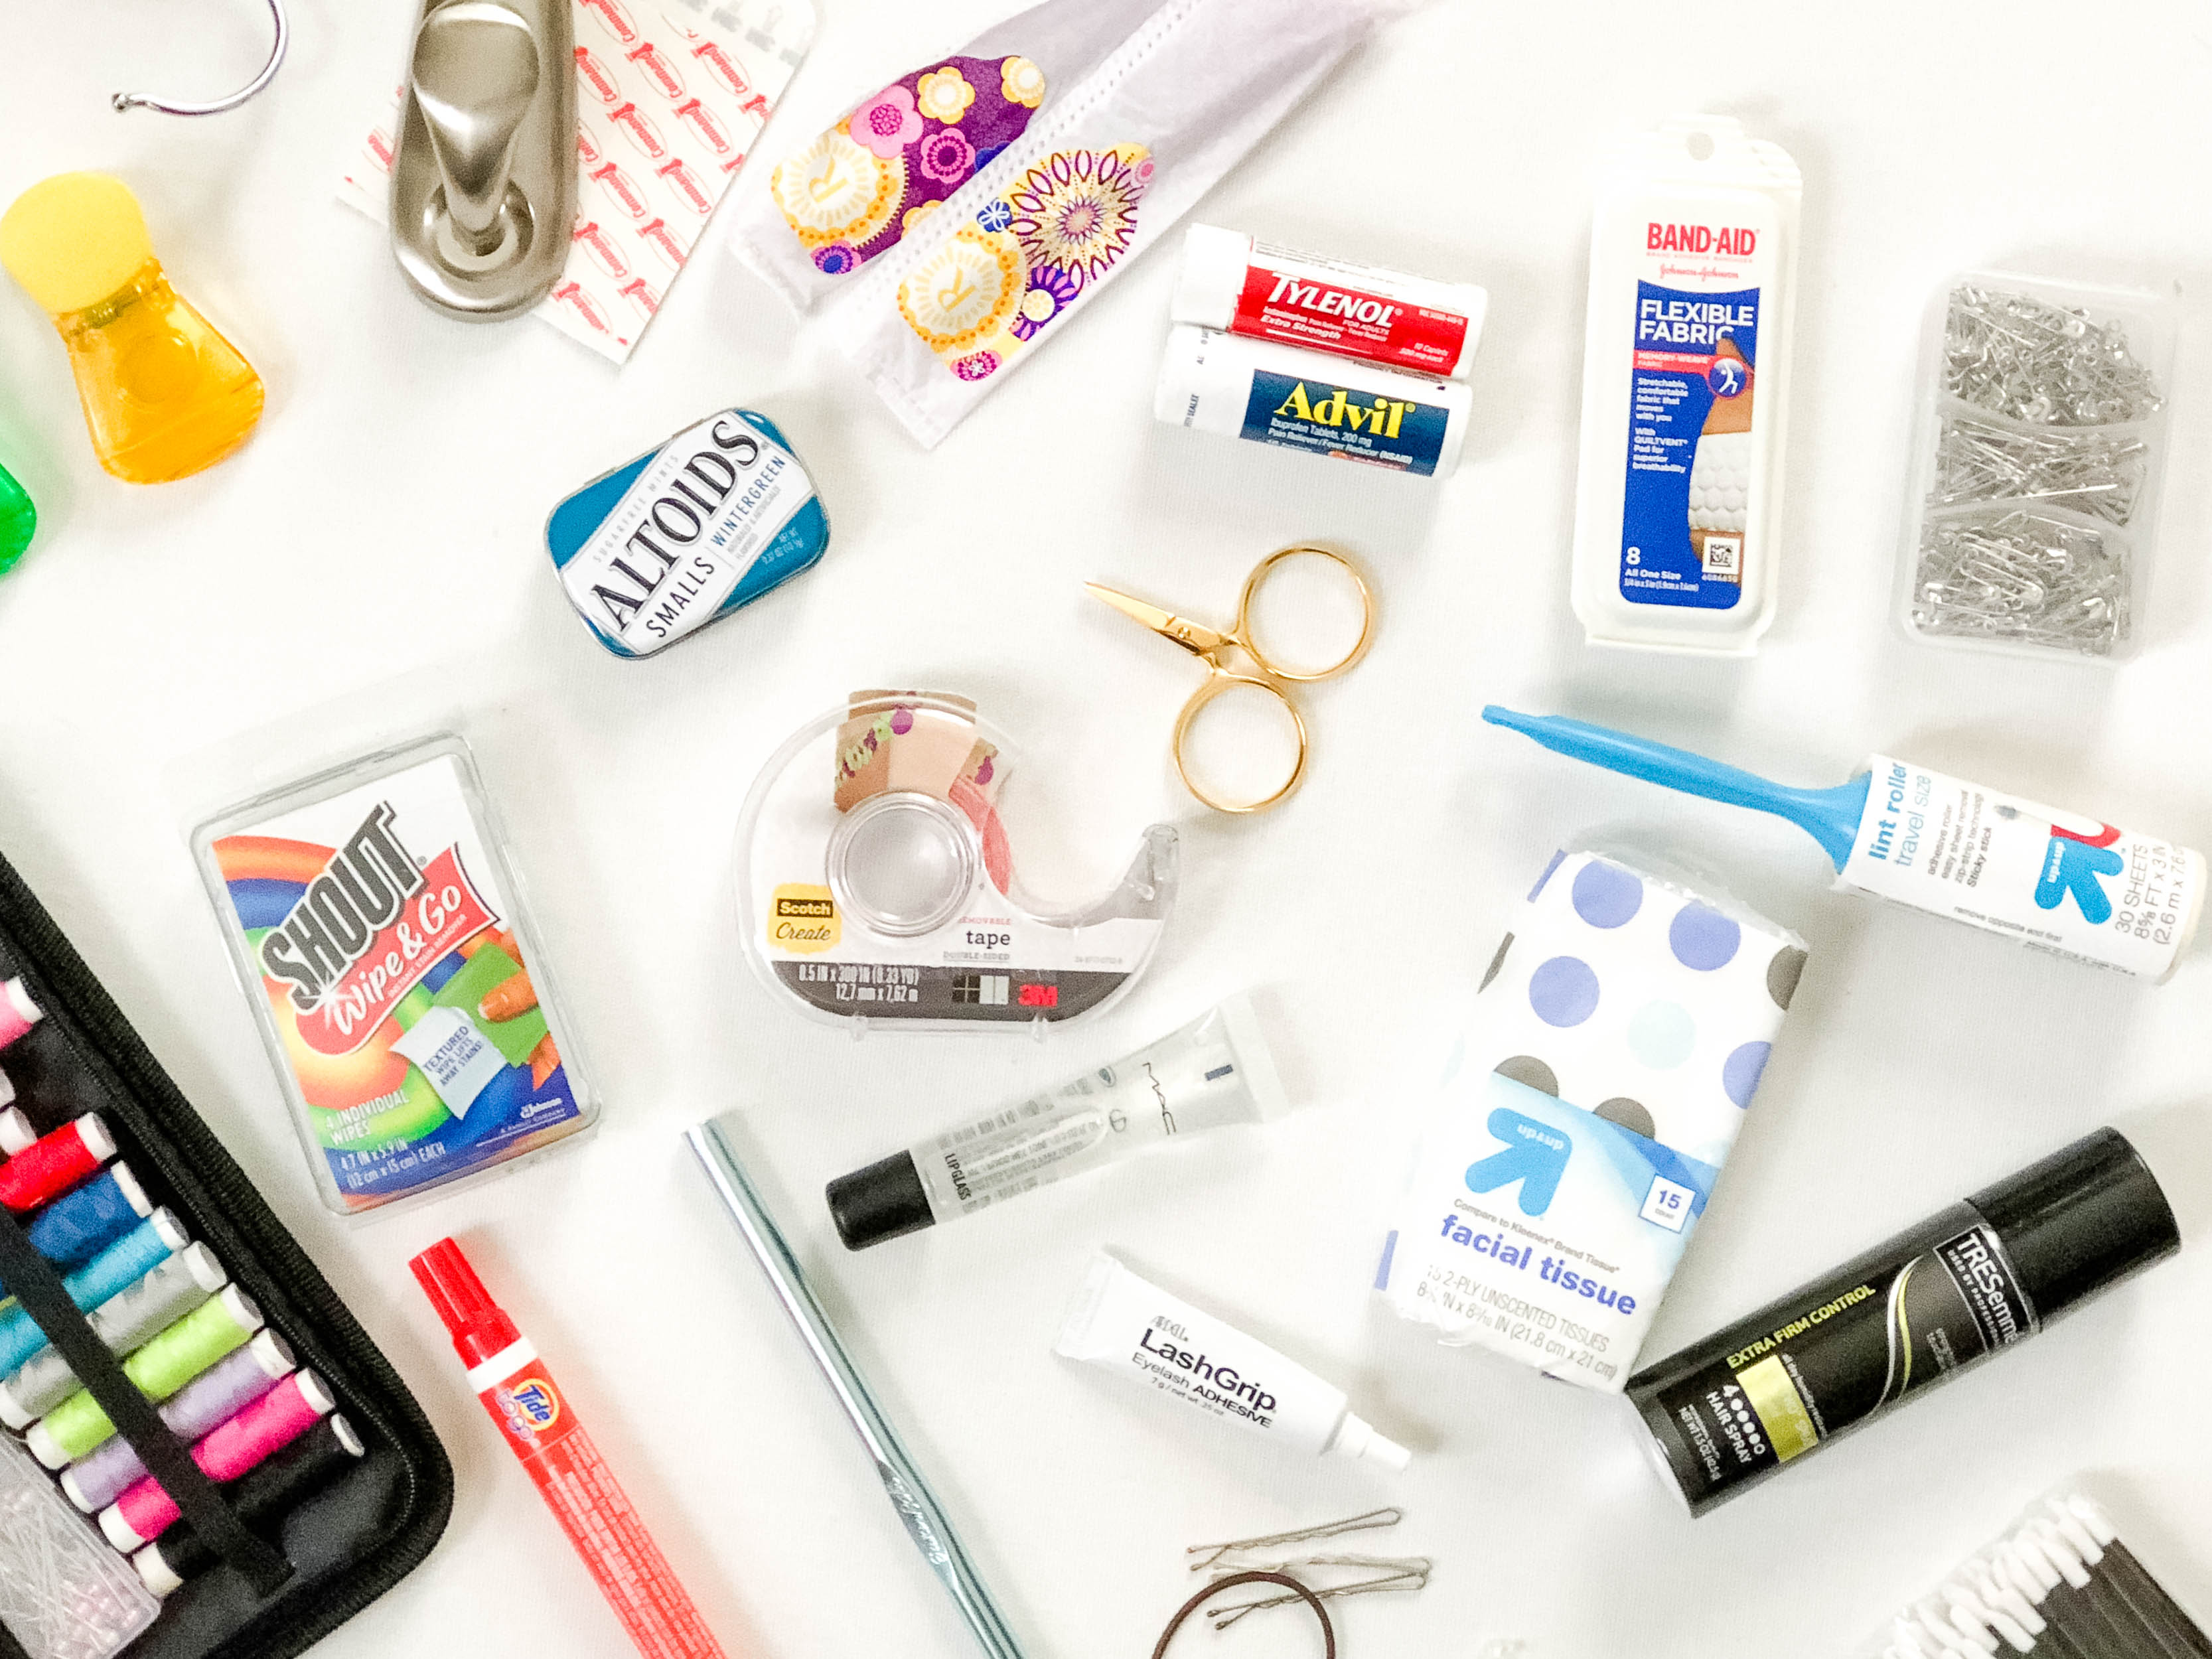 My Wedding Day Emergency Kit - A Photographer's Must Have